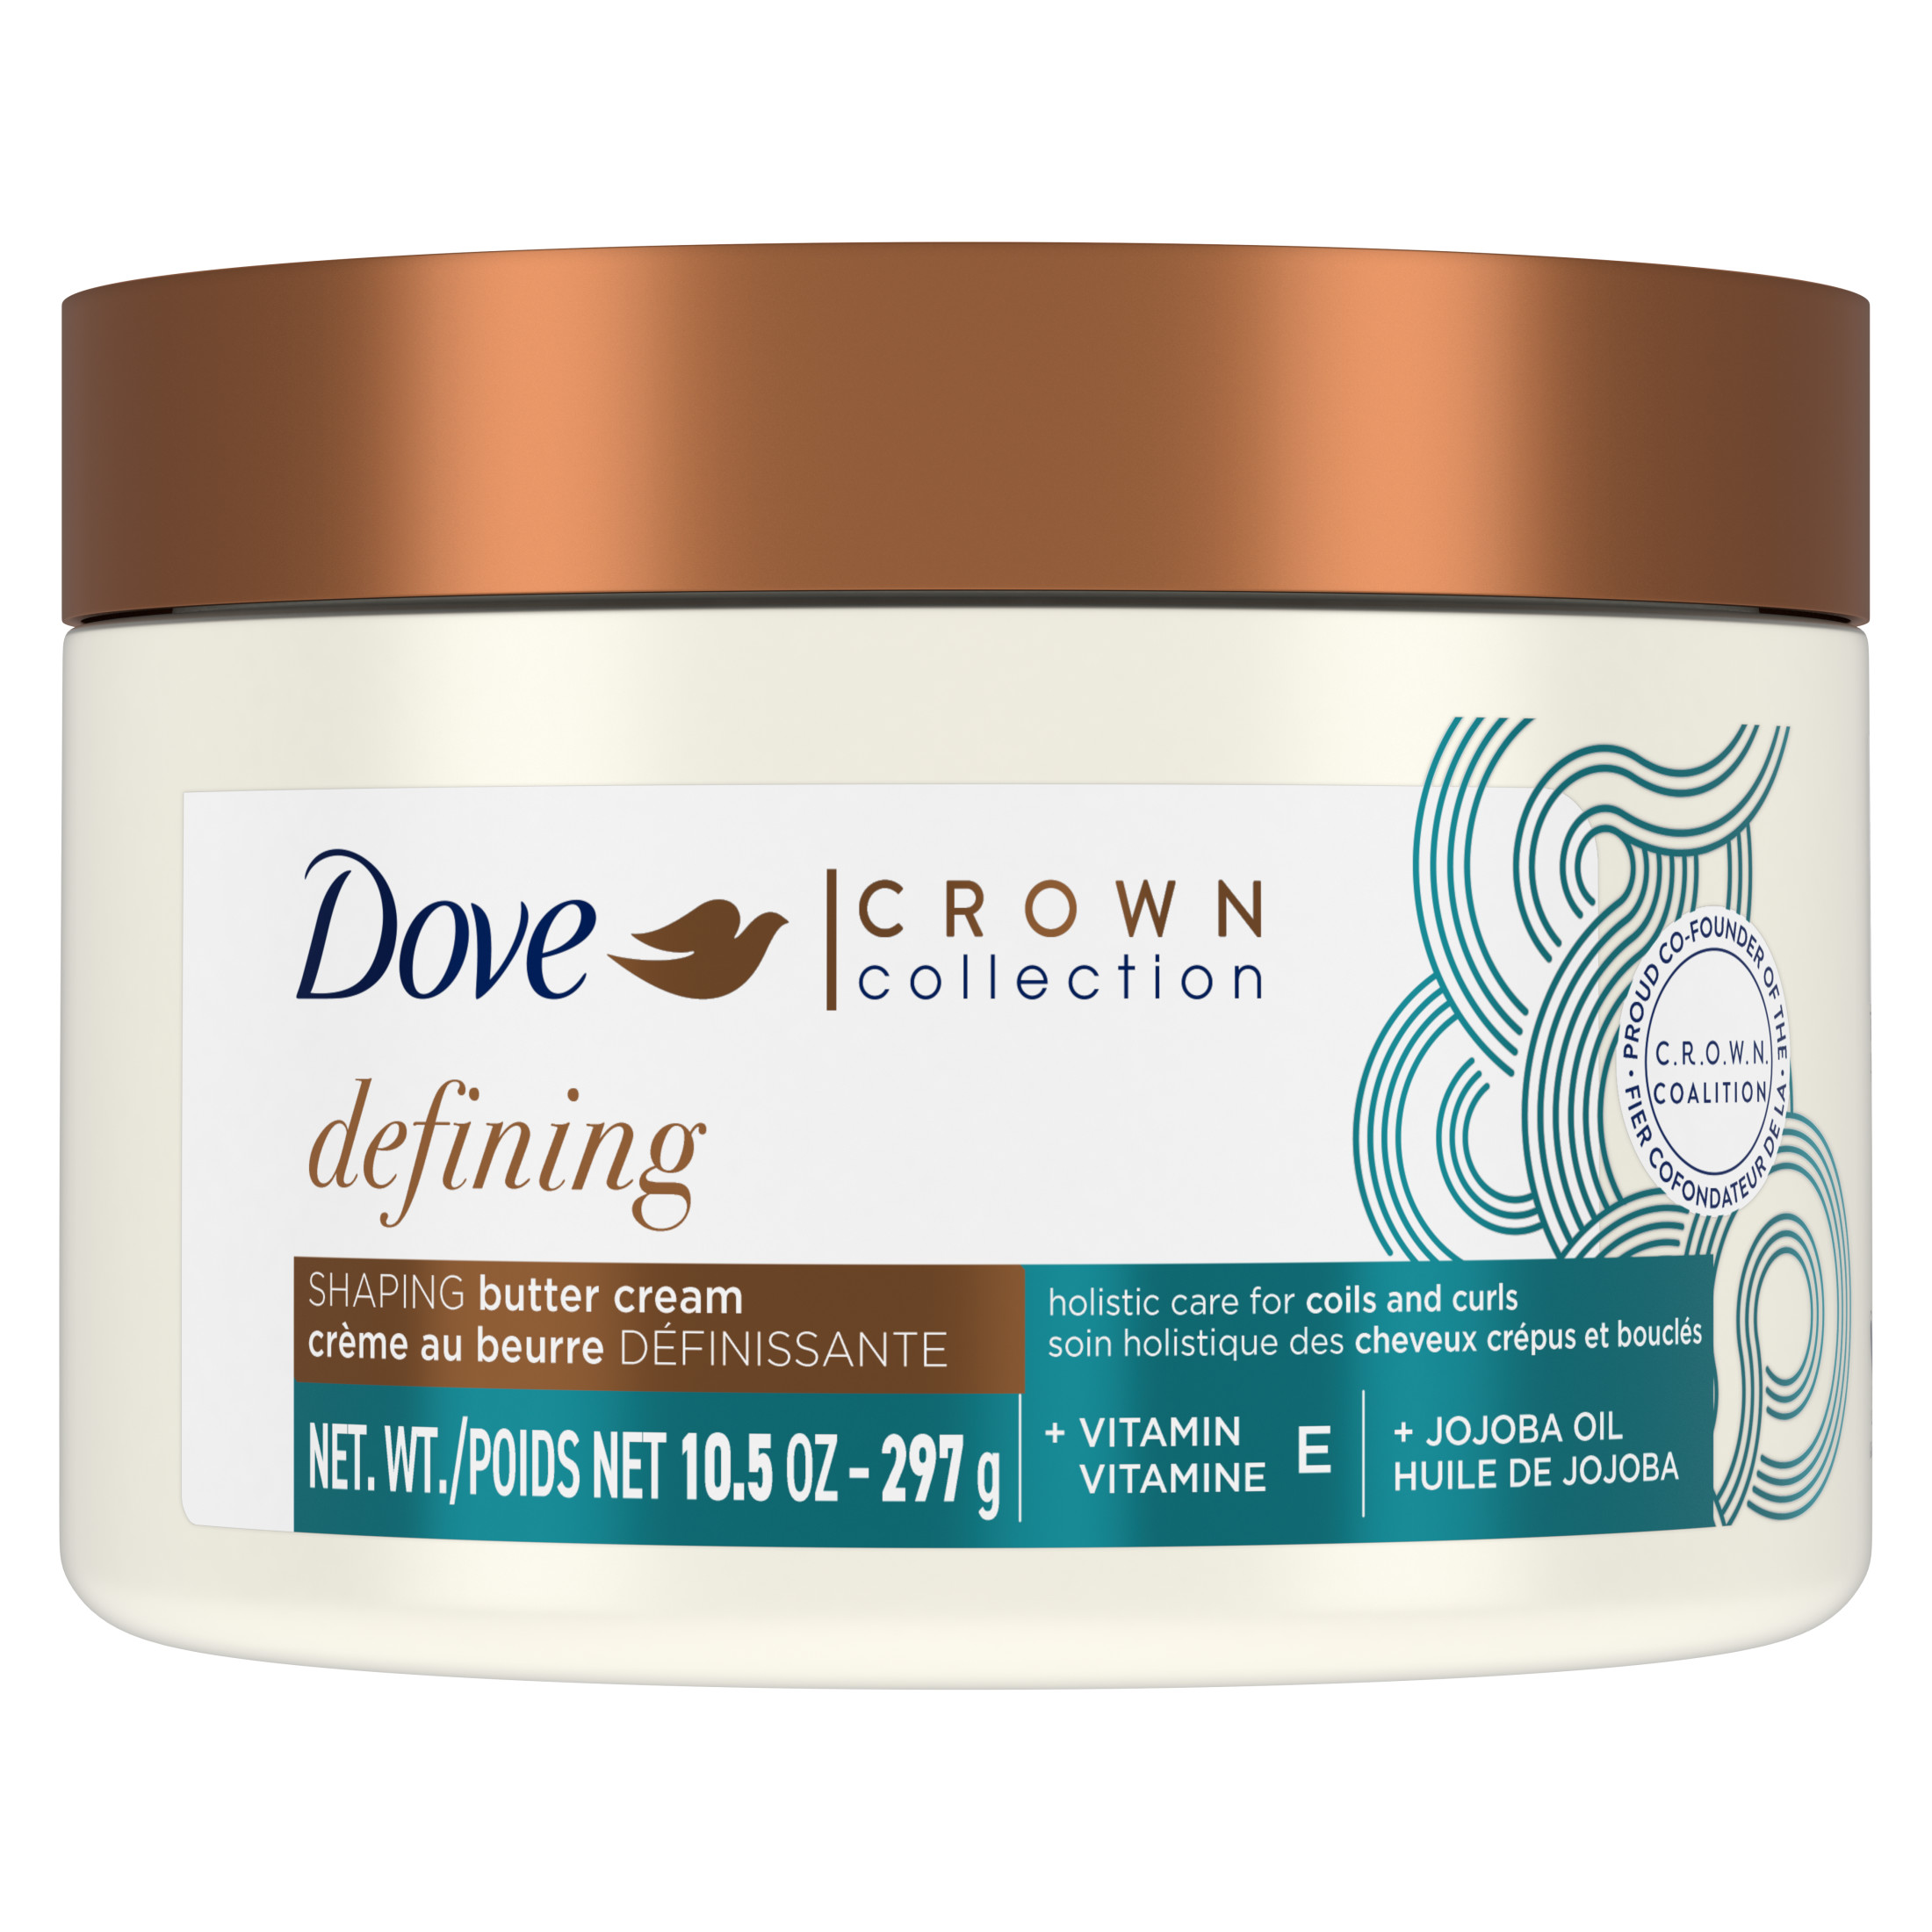 Dove Crown Collection Curl Enhancing Butter Cream Curly Hair, 10.5 oz - image 1 of 12